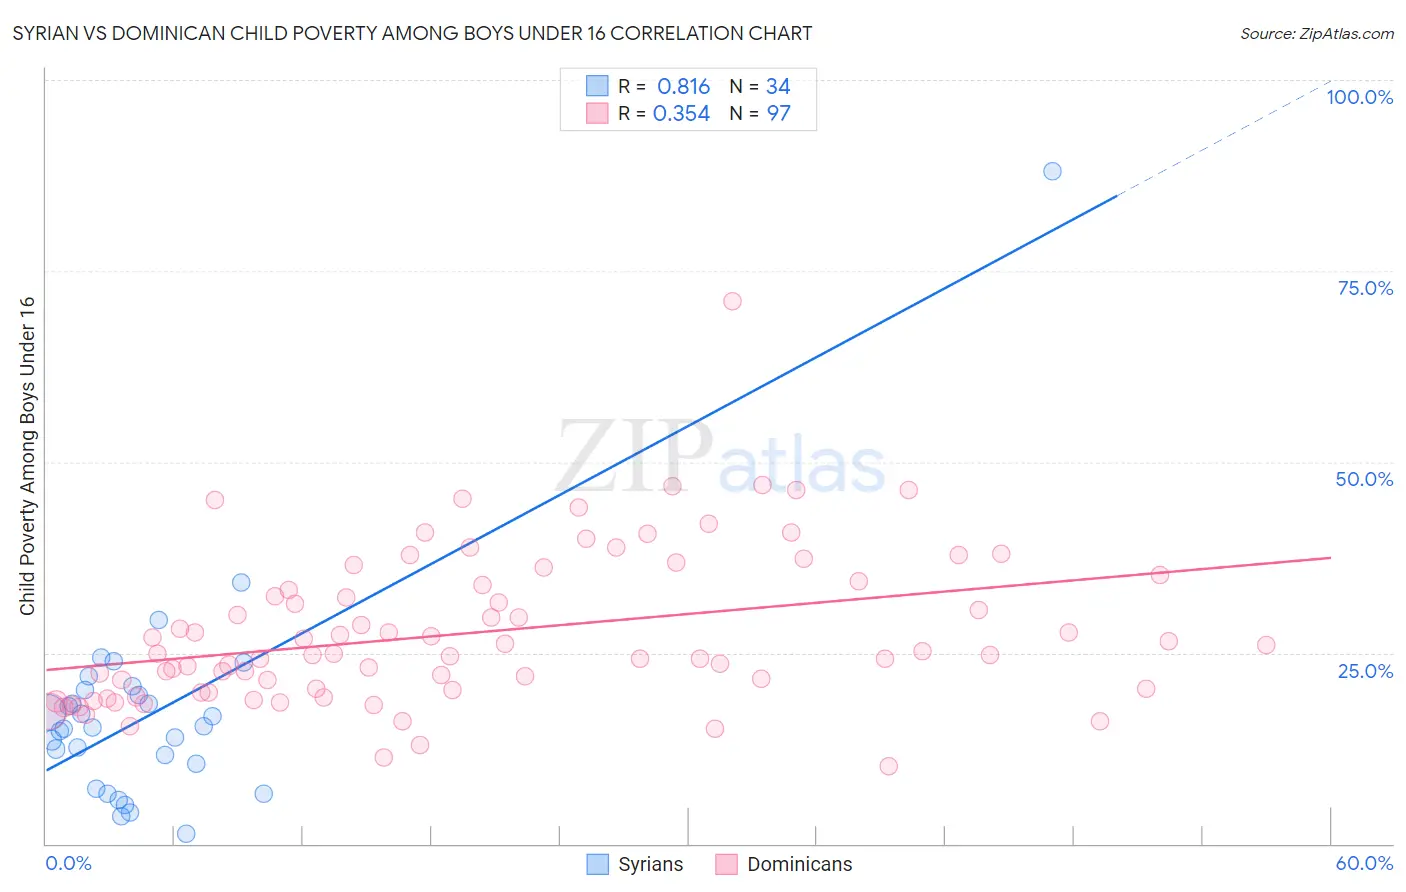 Syrian vs Dominican Child Poverty Among Boys Under 16